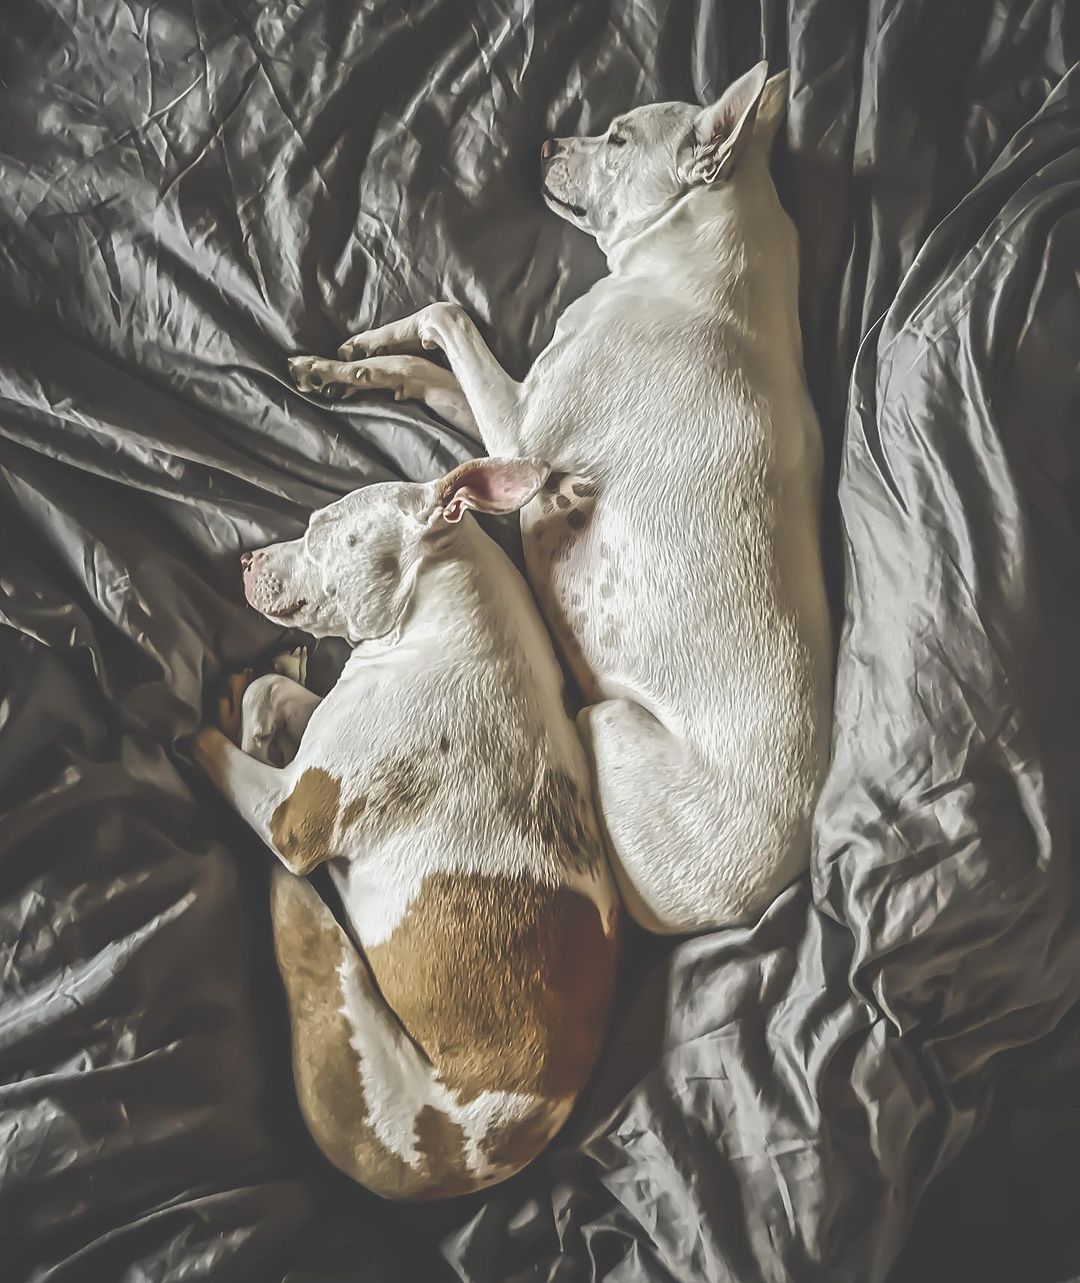 Two white dog sleeping on a bed